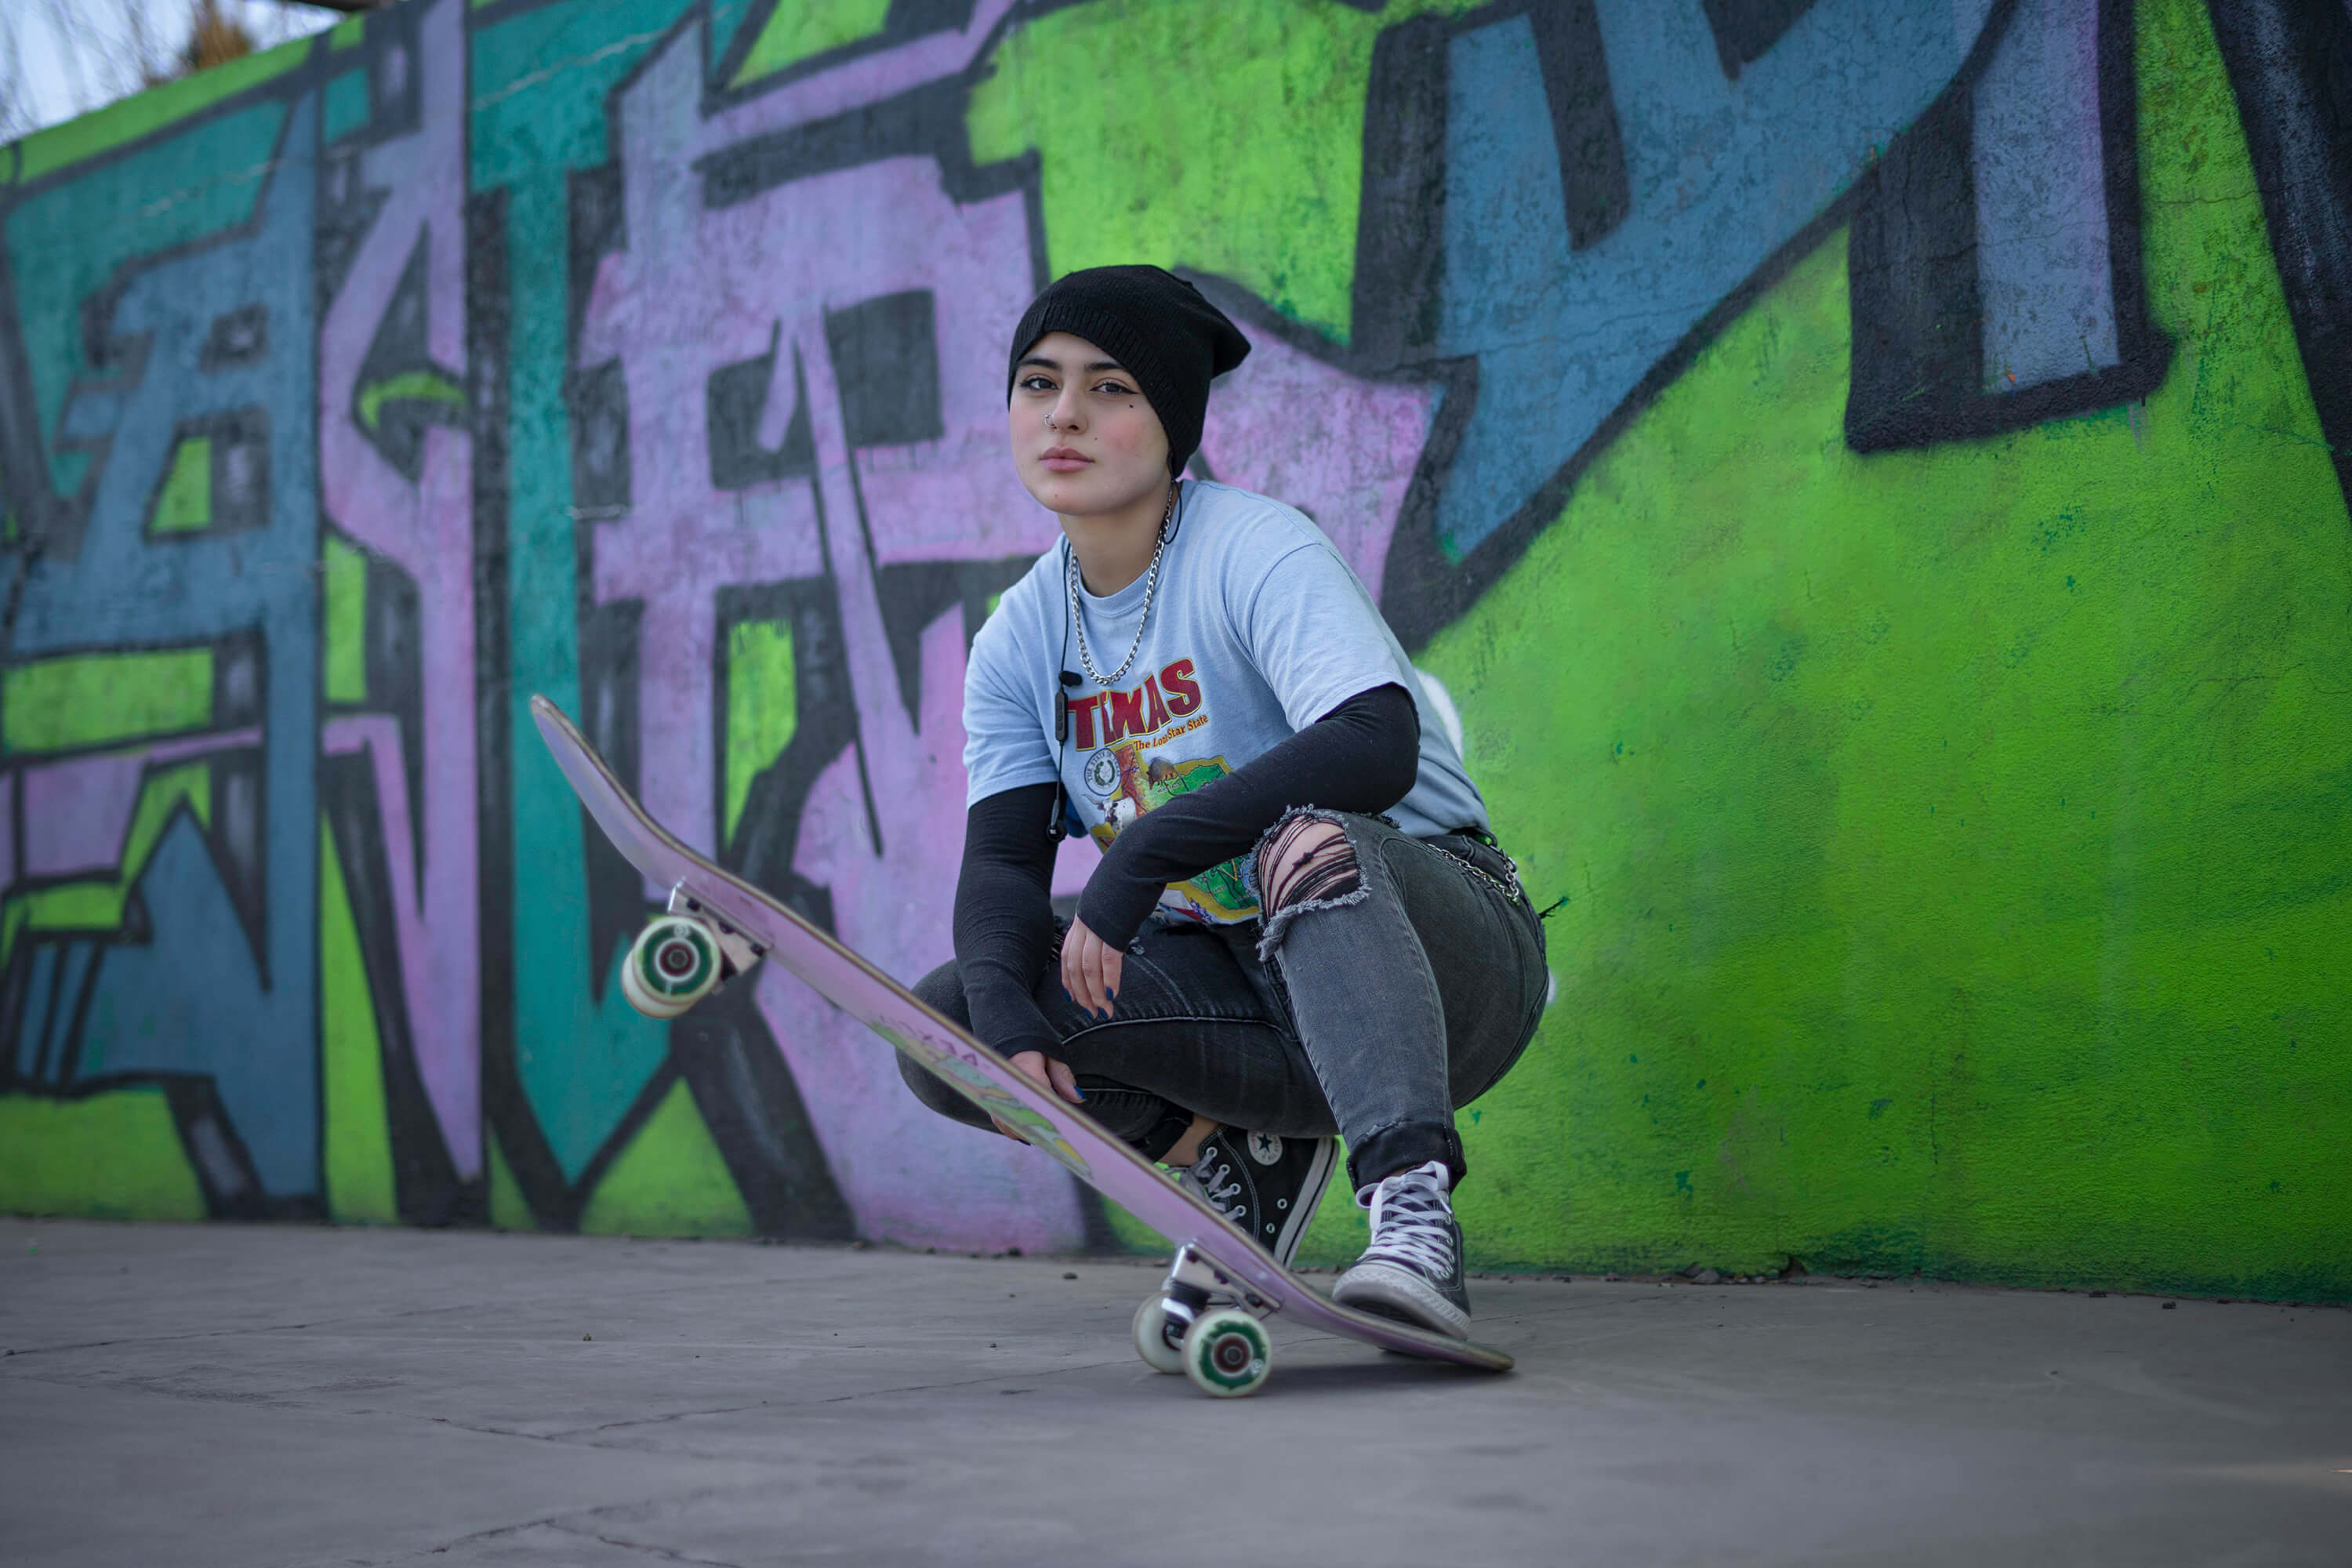 Girl Posing with skateboard in front of graffiti wall. 